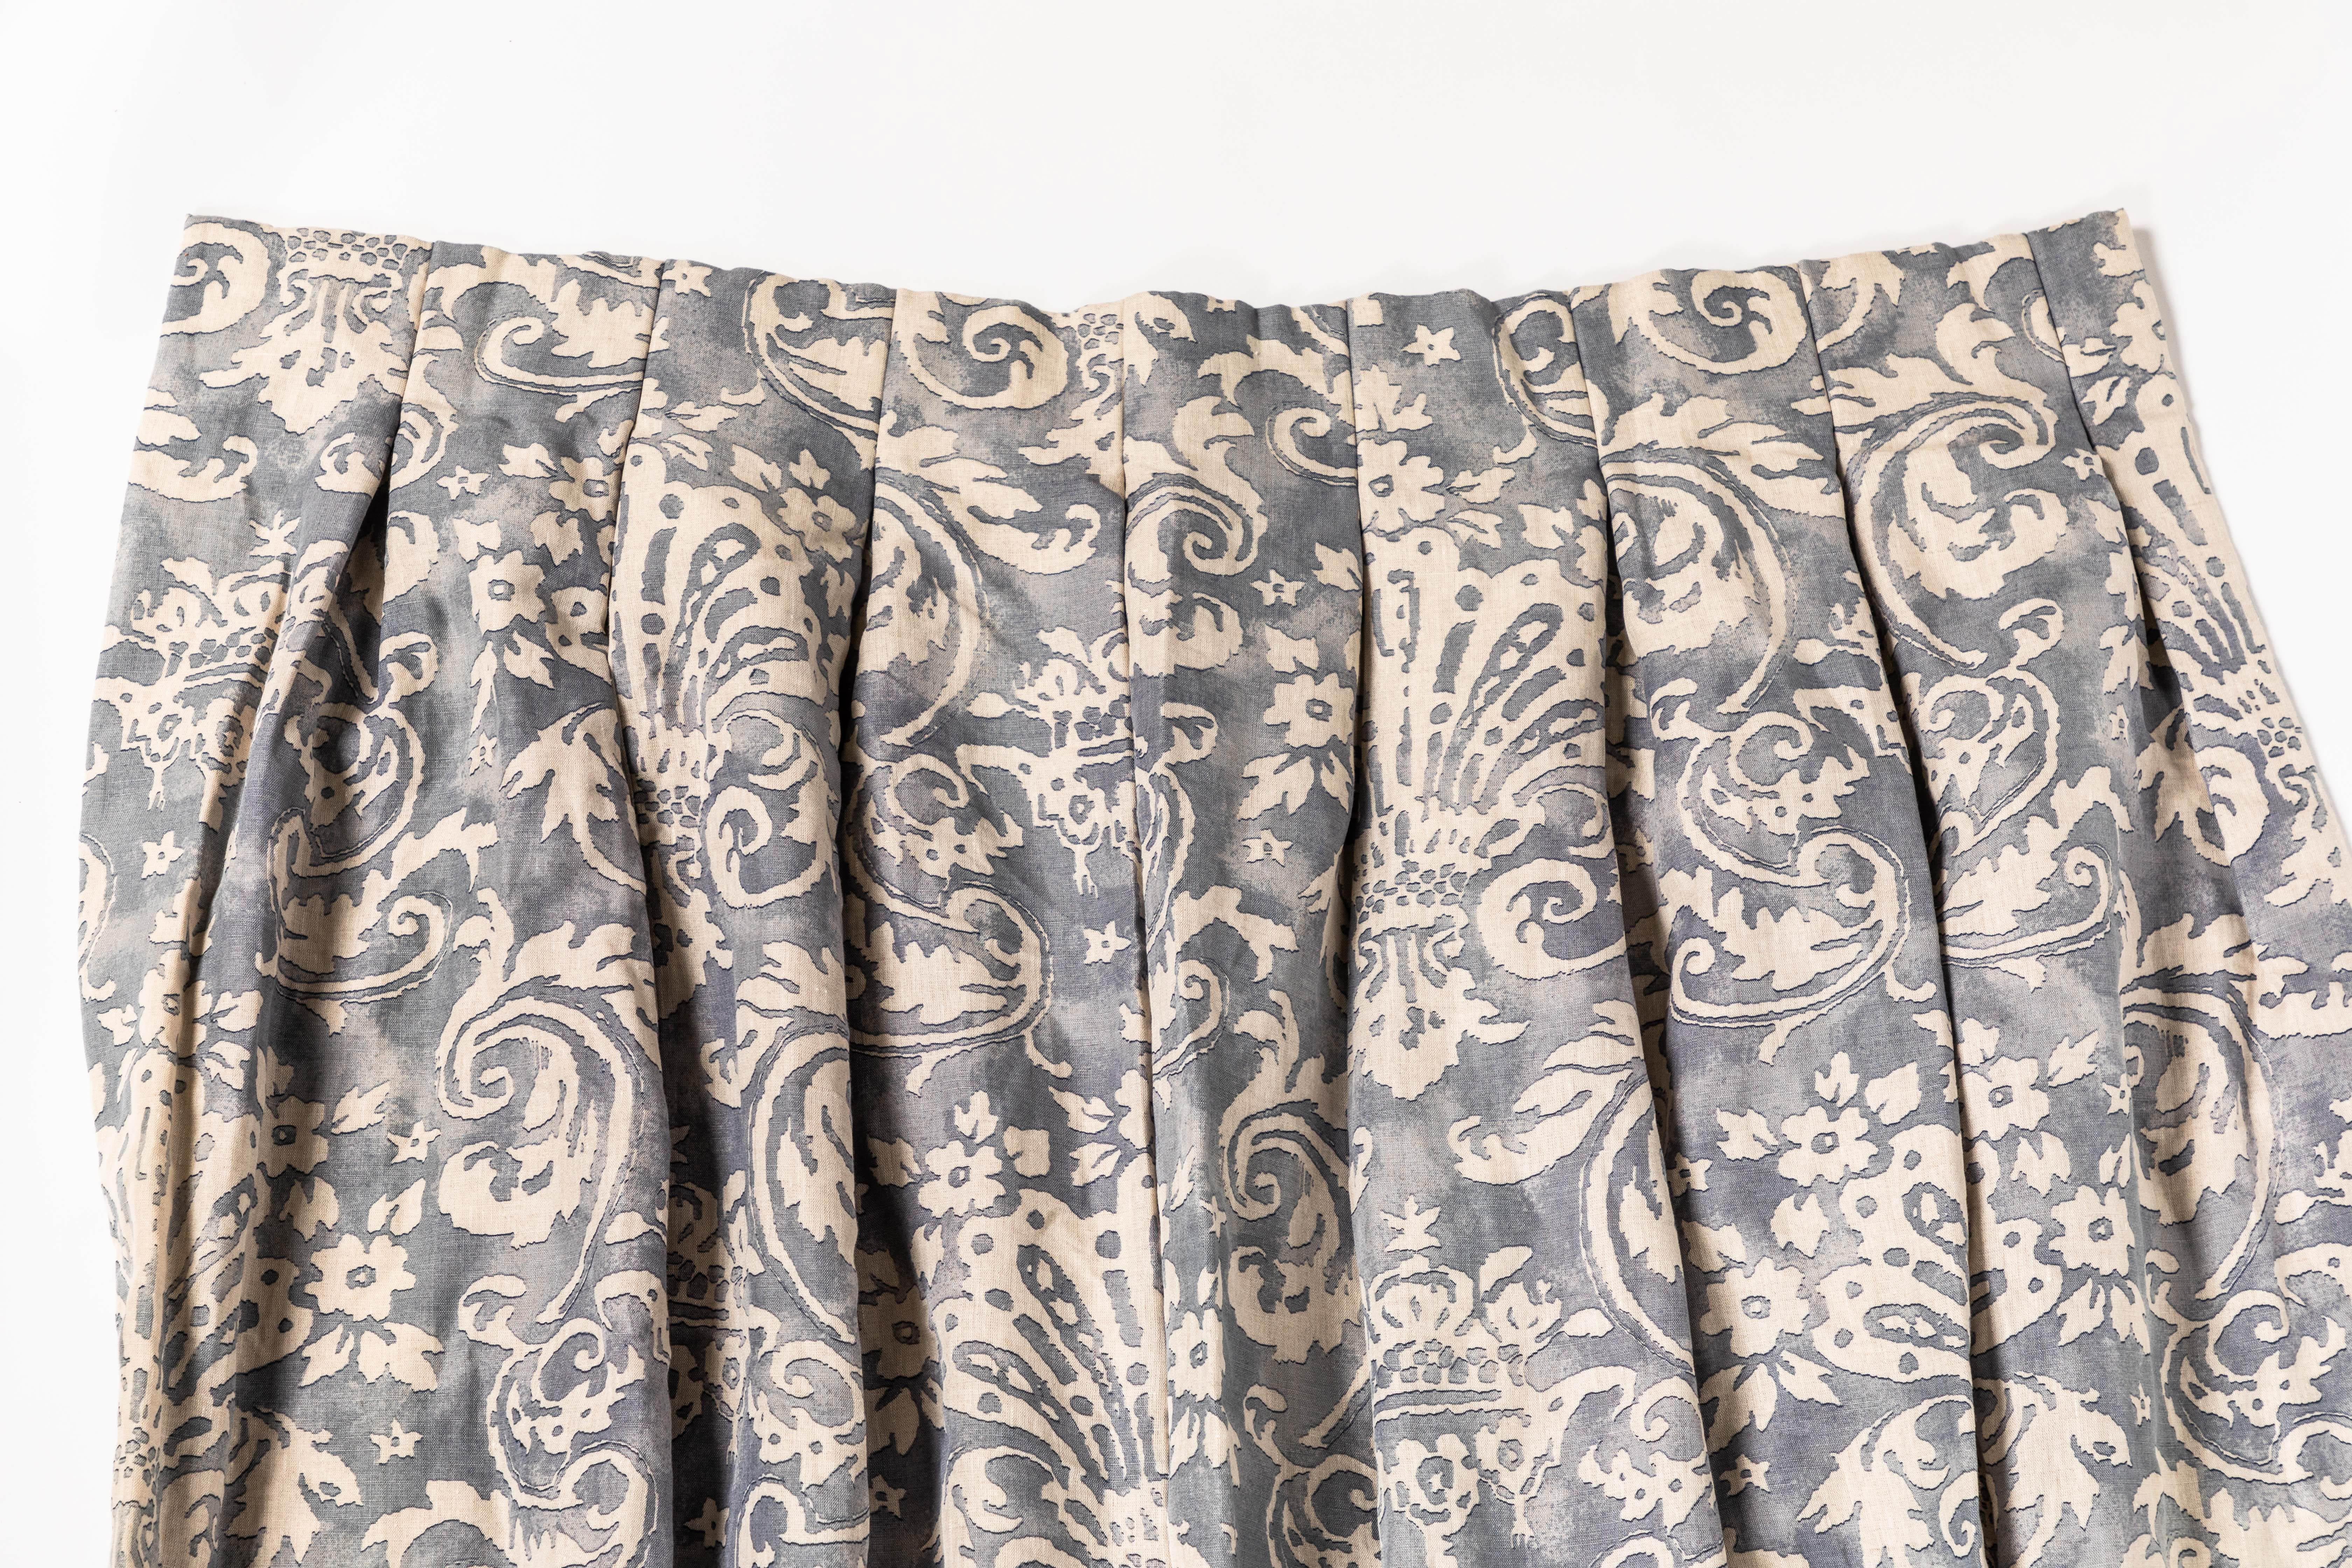 Set of eight (8) Classic damask printed cotton panels with pleated tops by Fortuny. Lining is ivory, made in the 20th century. The width at the top is 36